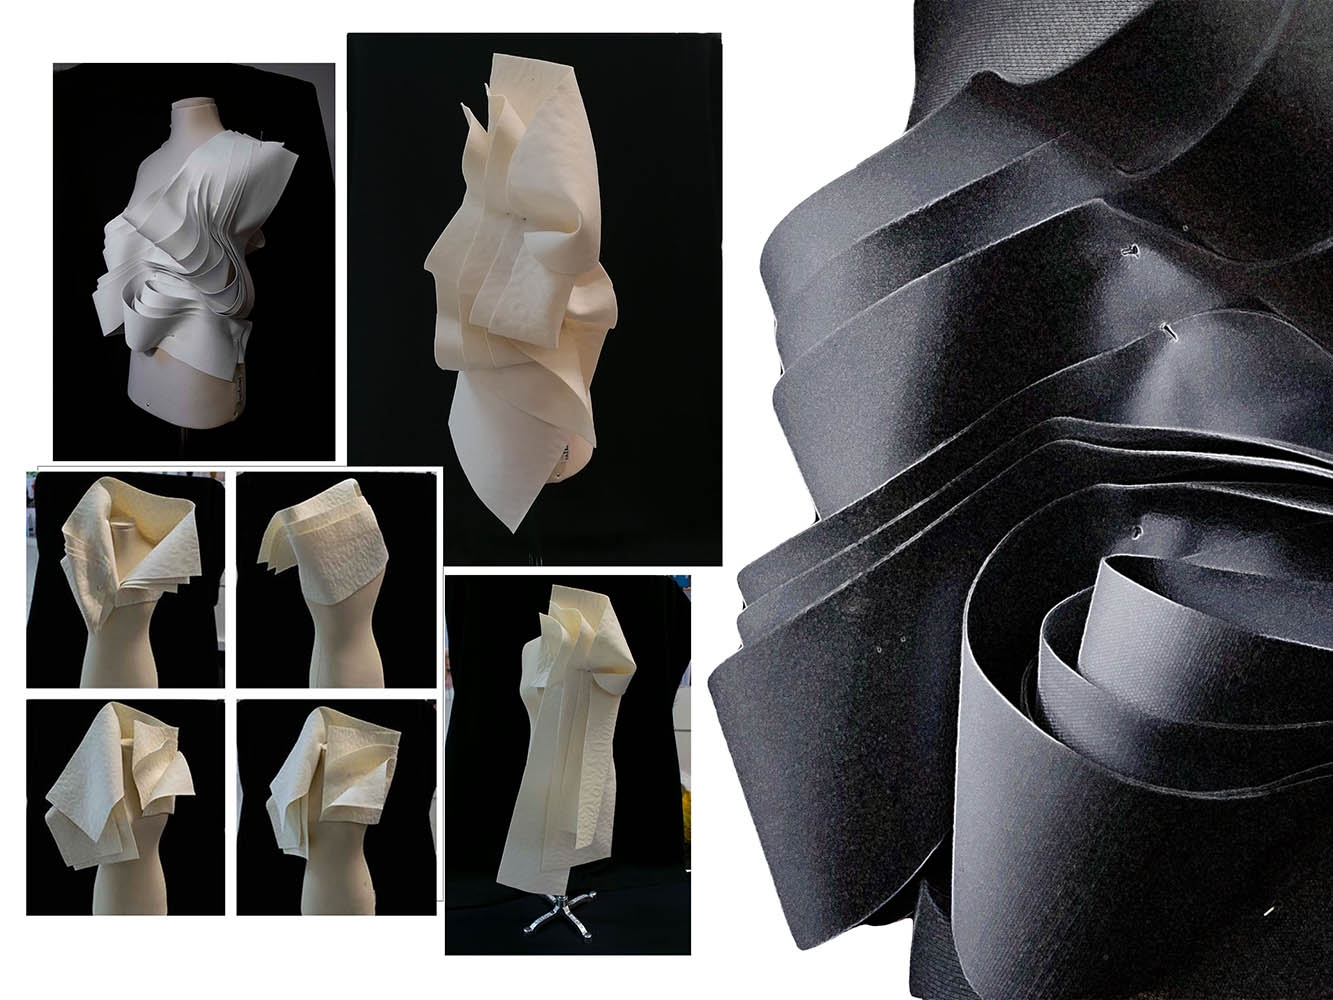 Several images of fashion design concepts using various layering techniques with paper